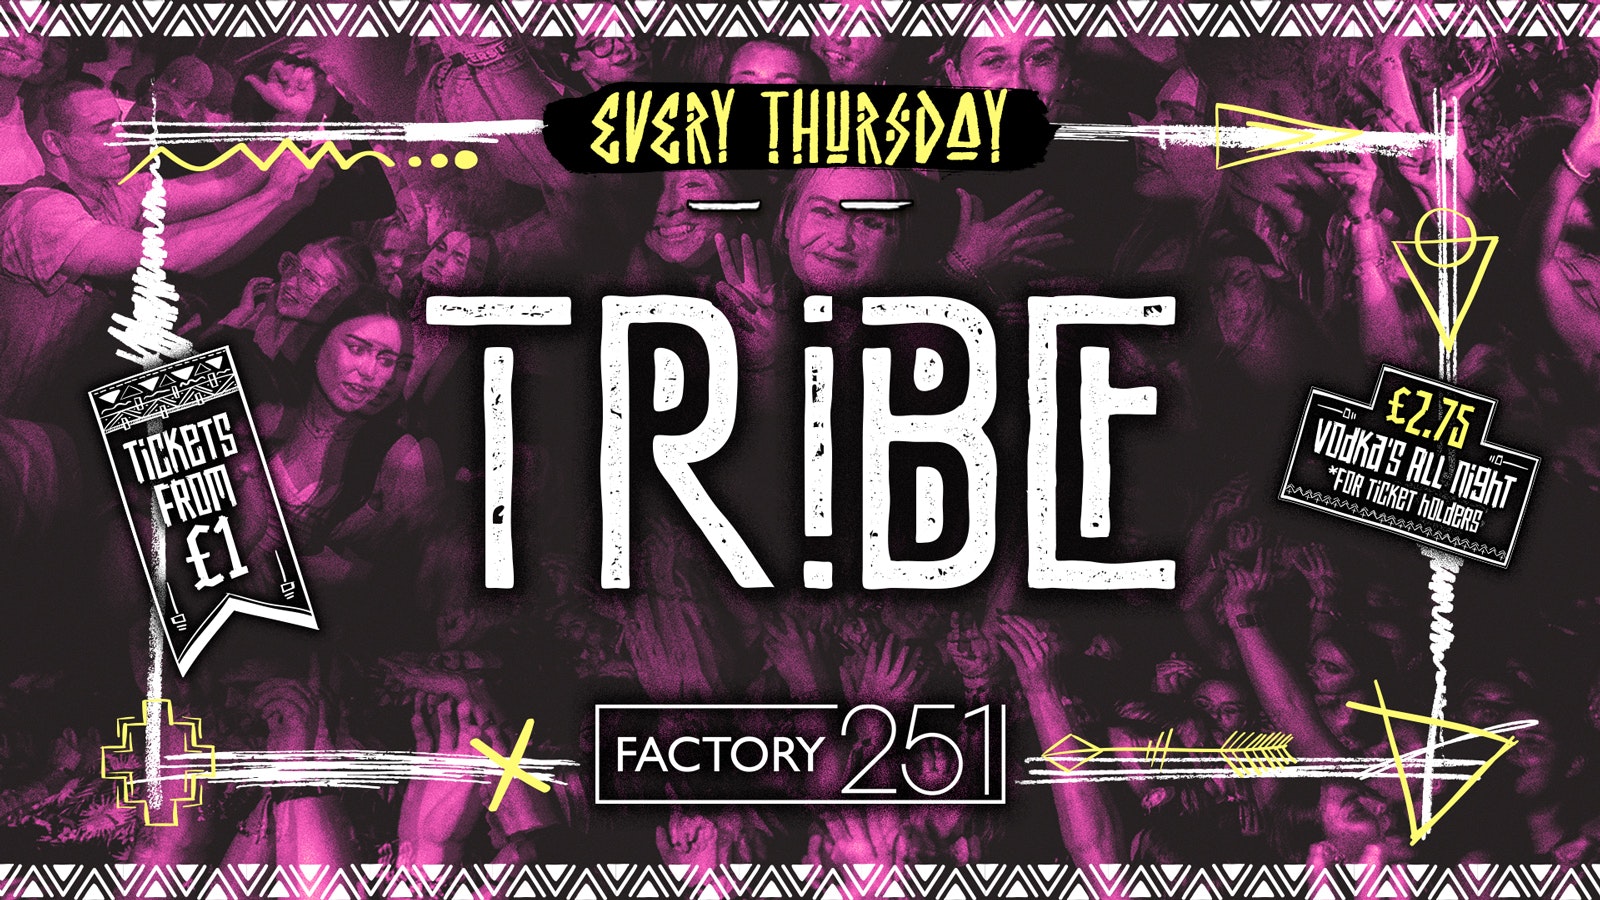 TRIBE 🌴 @ FACTORY | THURSDAY #004 | END OF EXAMS RAVE 🎶 TICKETS NOW ON SALE